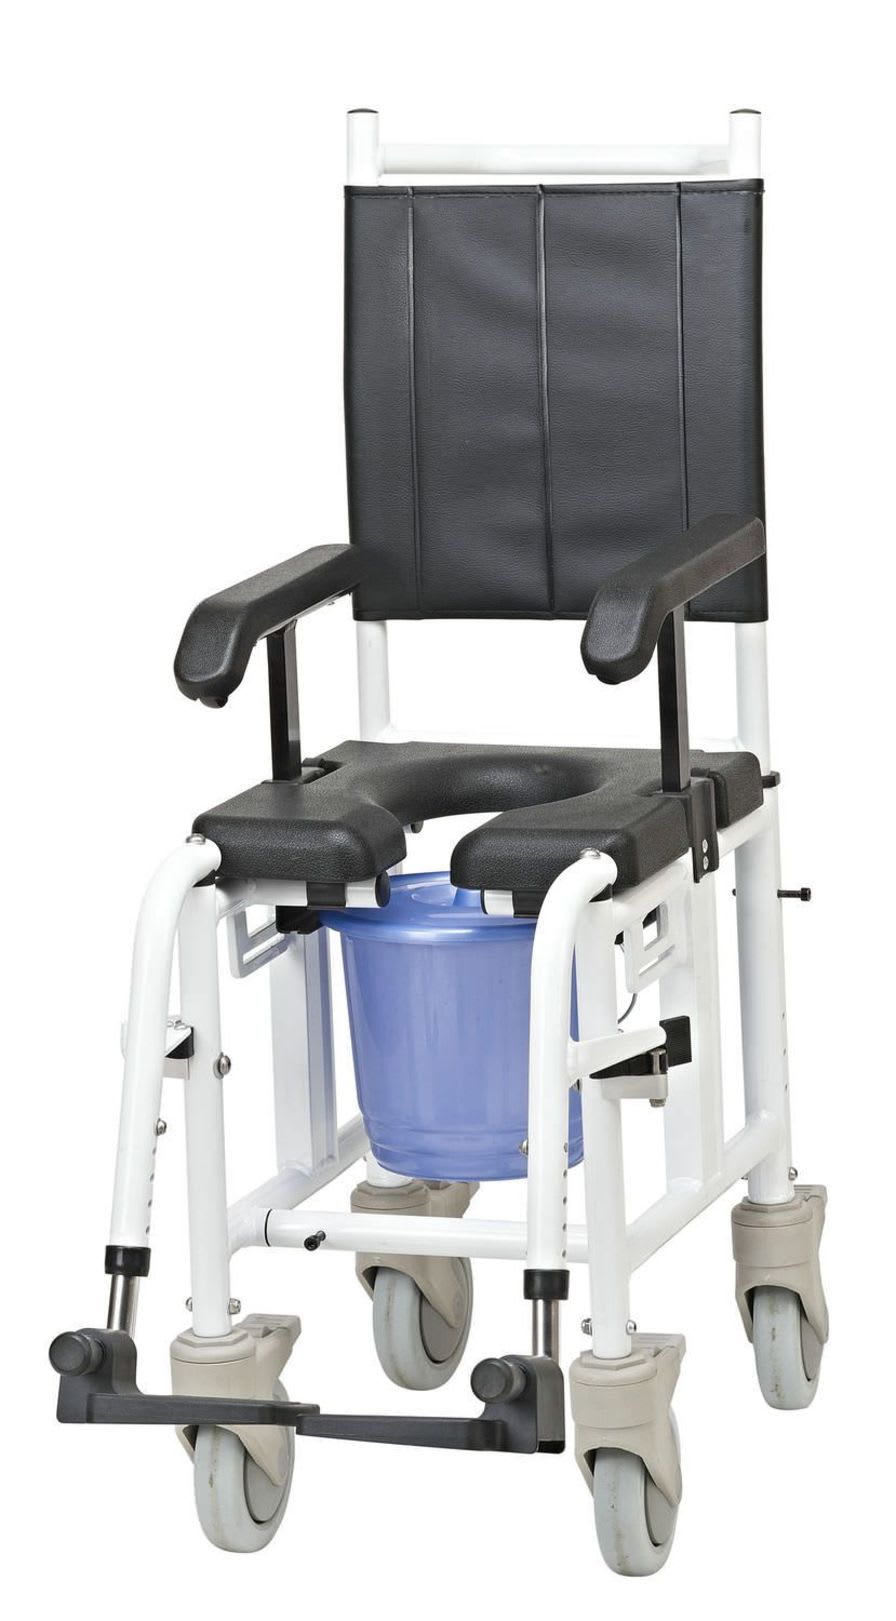 Commode chair / on casters / pediatric JY-761 Guangdong Shunde Jaeyong Hardware